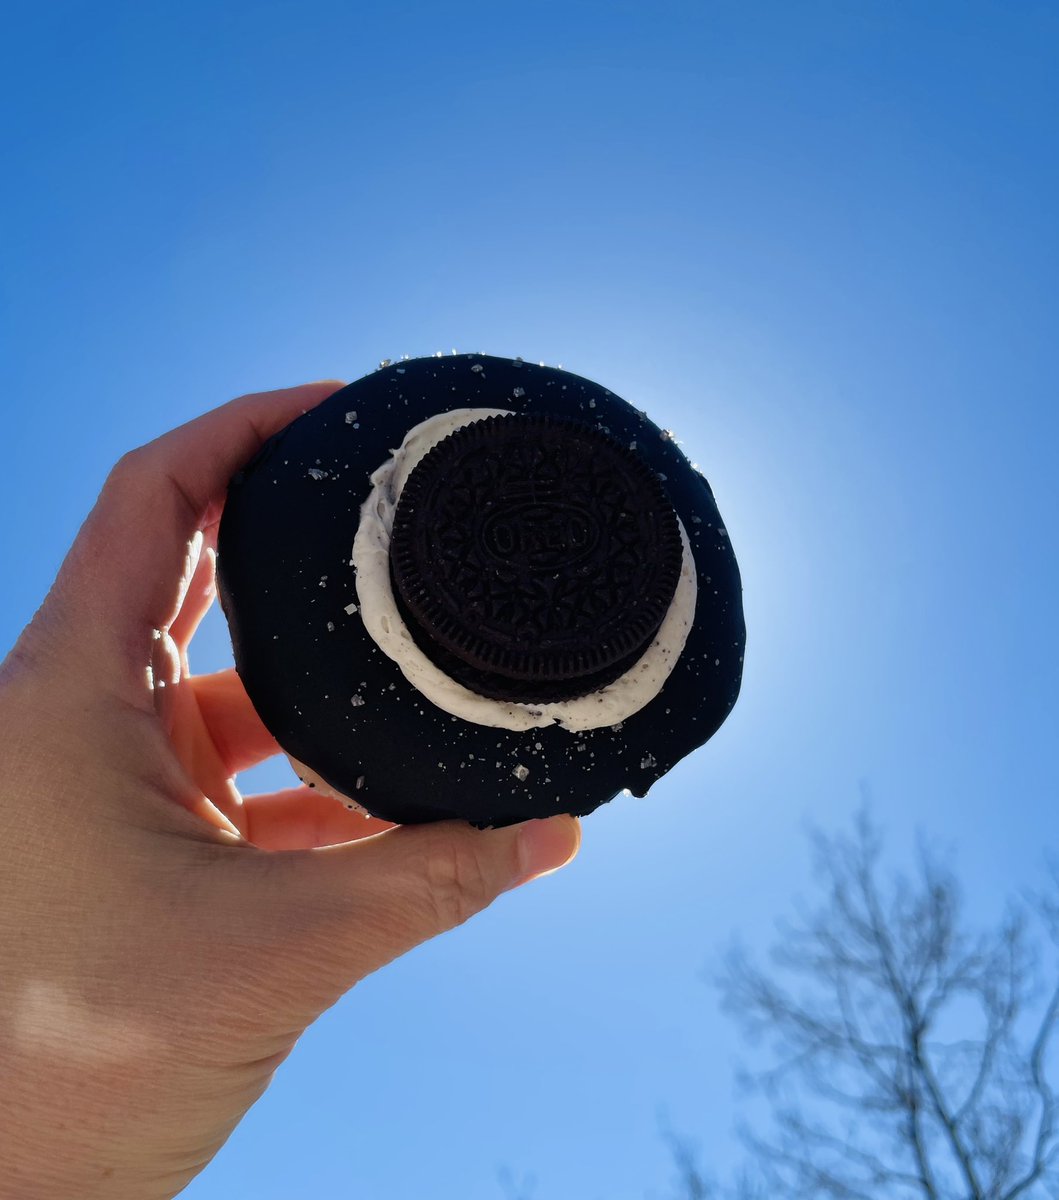 I treated myself to a solar eclipse donut on my walk home from the gym. I thought it was DELICIOUS but I always love those super-sweet KKs. Appreciate the creativity! #TotalEclipse